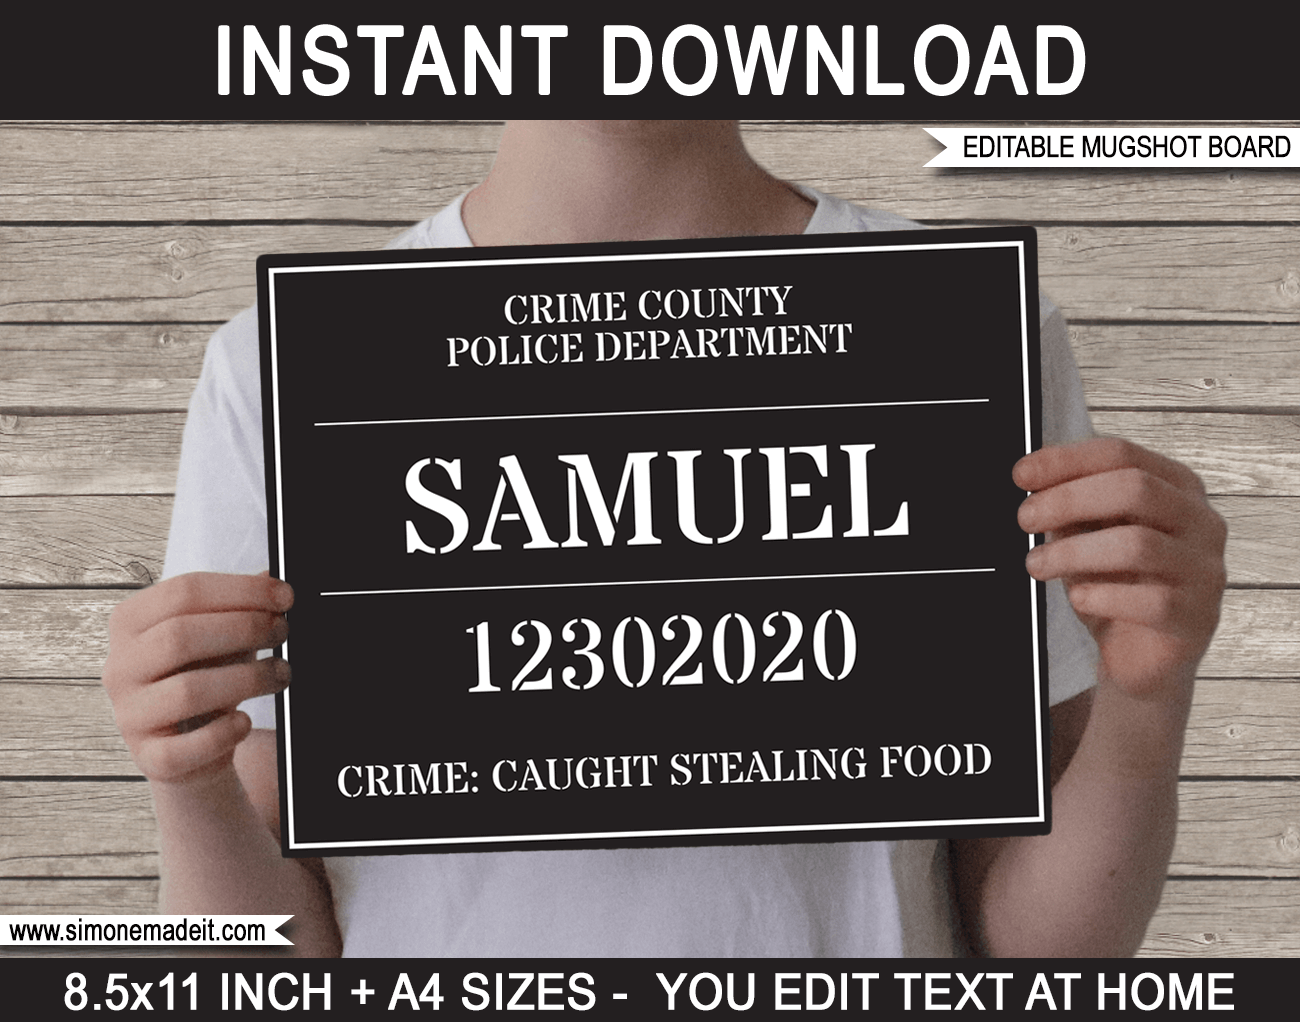 Mugshot Sign Board - Printable Photo Booth Prop - Mug Shot Board - Police Birthday Party, Murder Mystery, Cops & Robbers, Stag, Bachelor Party, Spy Party, CSI - INSTANT DOWNLOAD with Editable text via simonemadeit.com